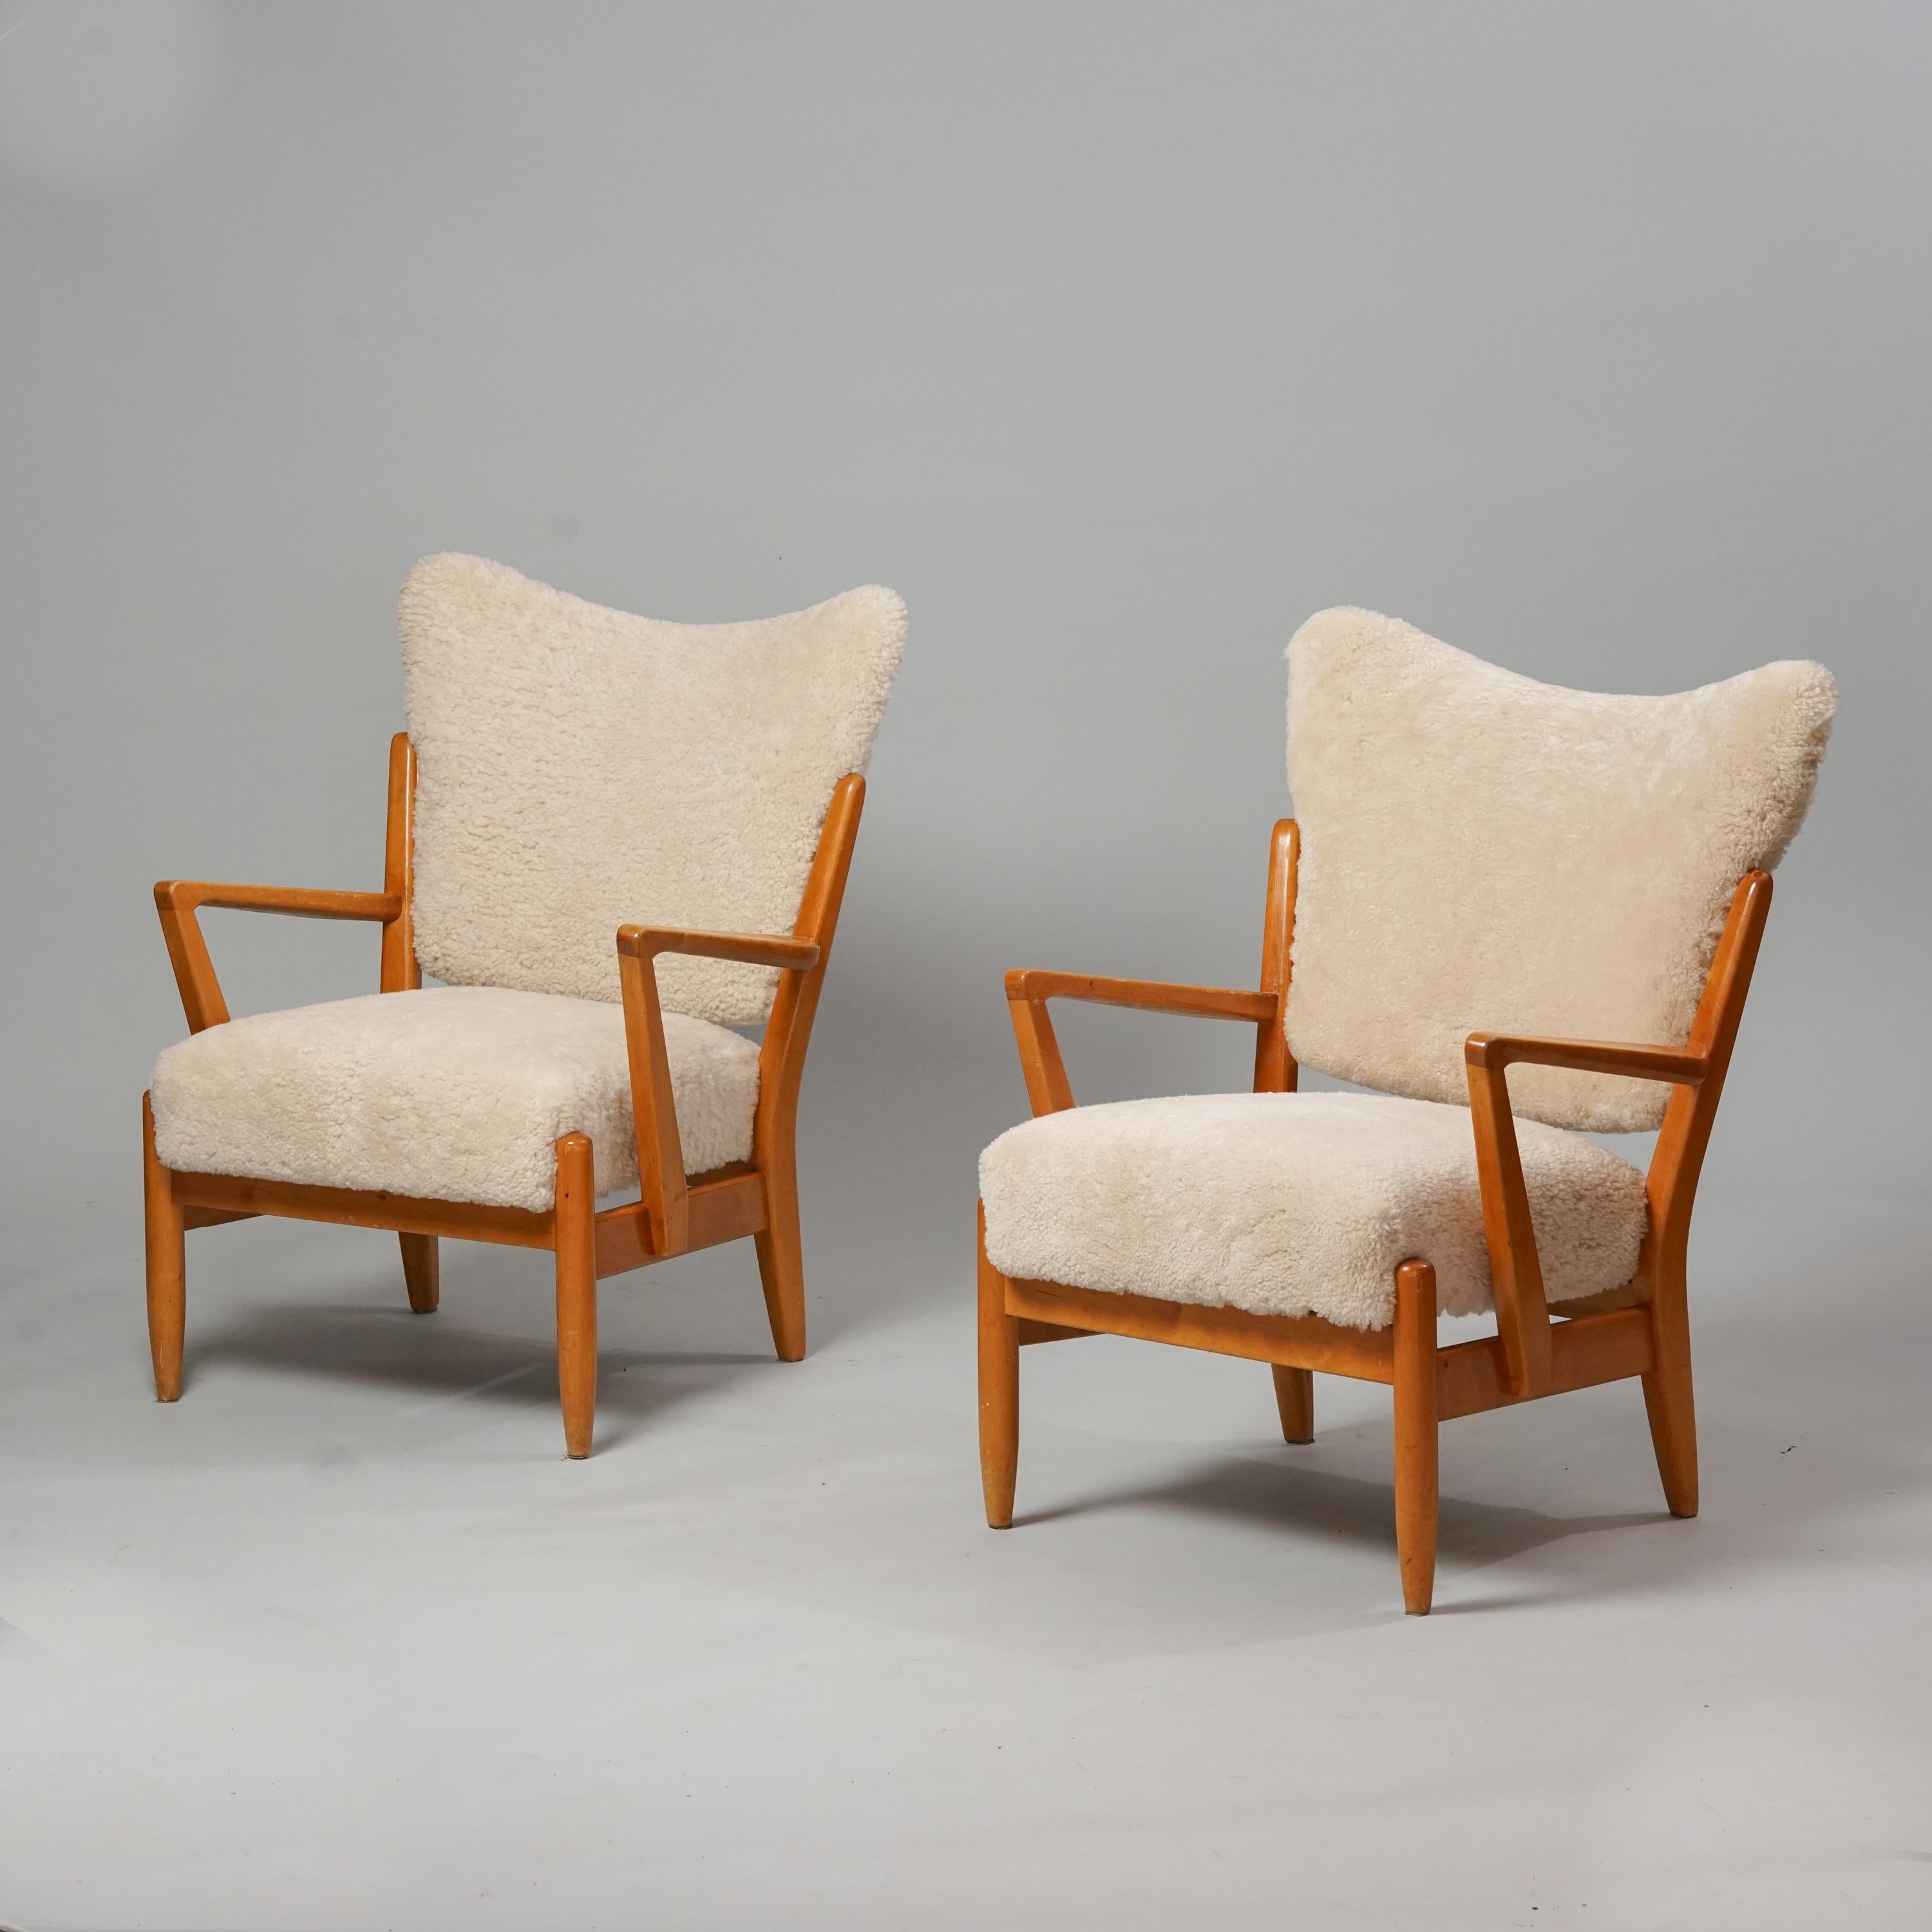 Scandinavian Modern Model 2411 Armchairs, manufactured by Asko, 1950s. Birch frame, new sheepskin upholstery. Good vintage condition, minor patina consistent with age and use. The armchairs are sold as a set. Classic Scandinavian Modern style. 